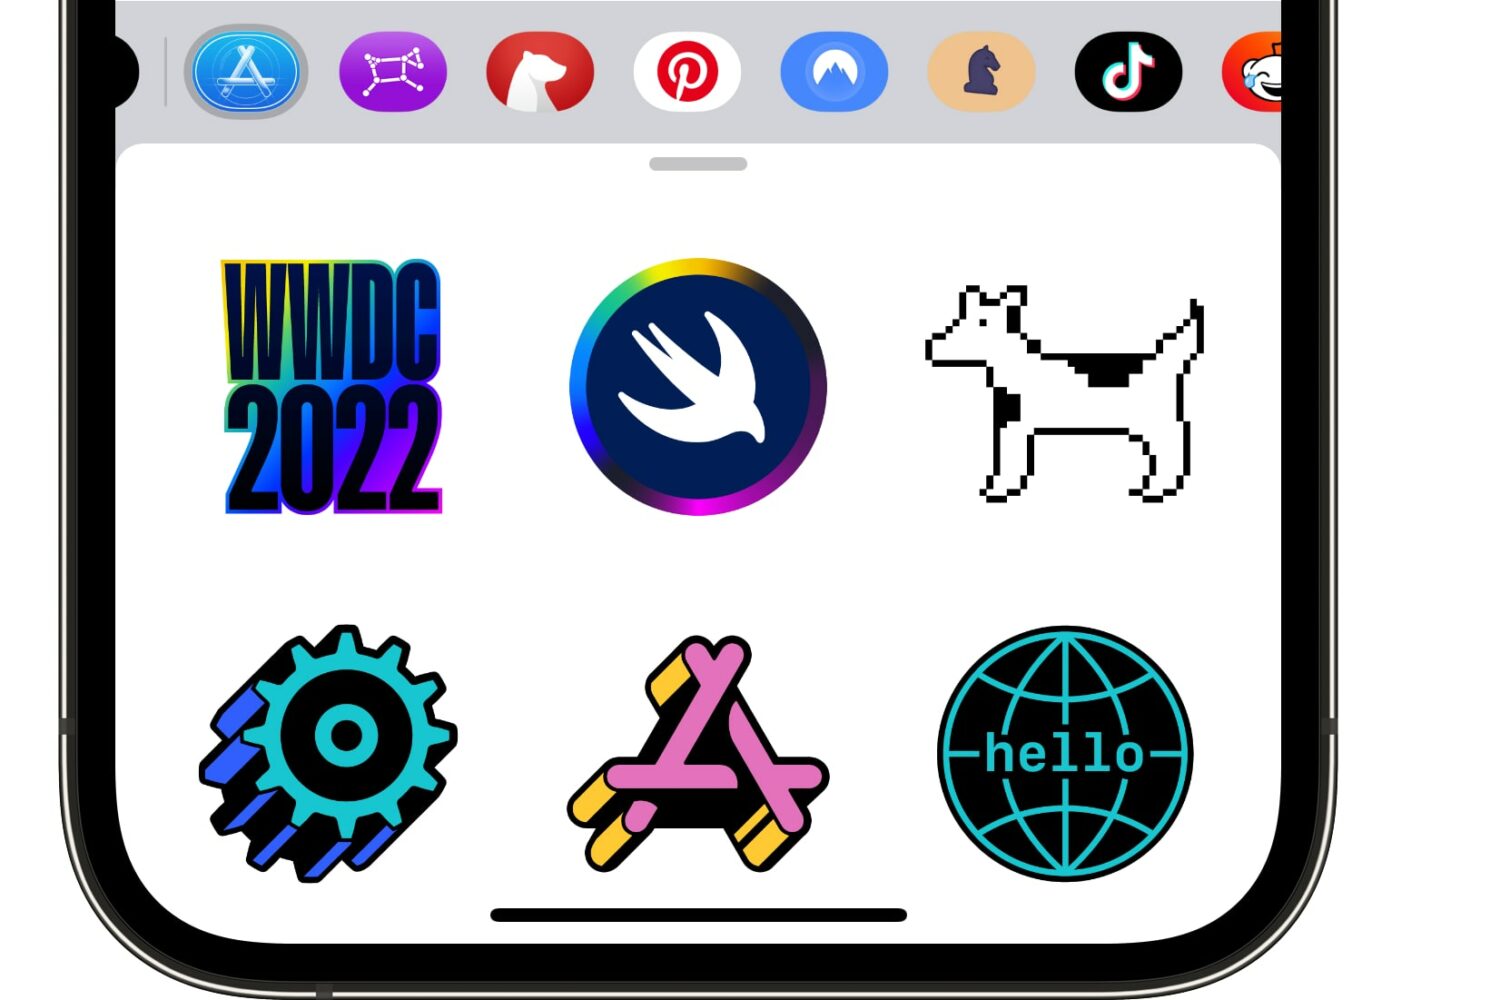 The official WWDC 2022 stickers in the app drawer of the Messages app are showcased in this iPhone screenshot